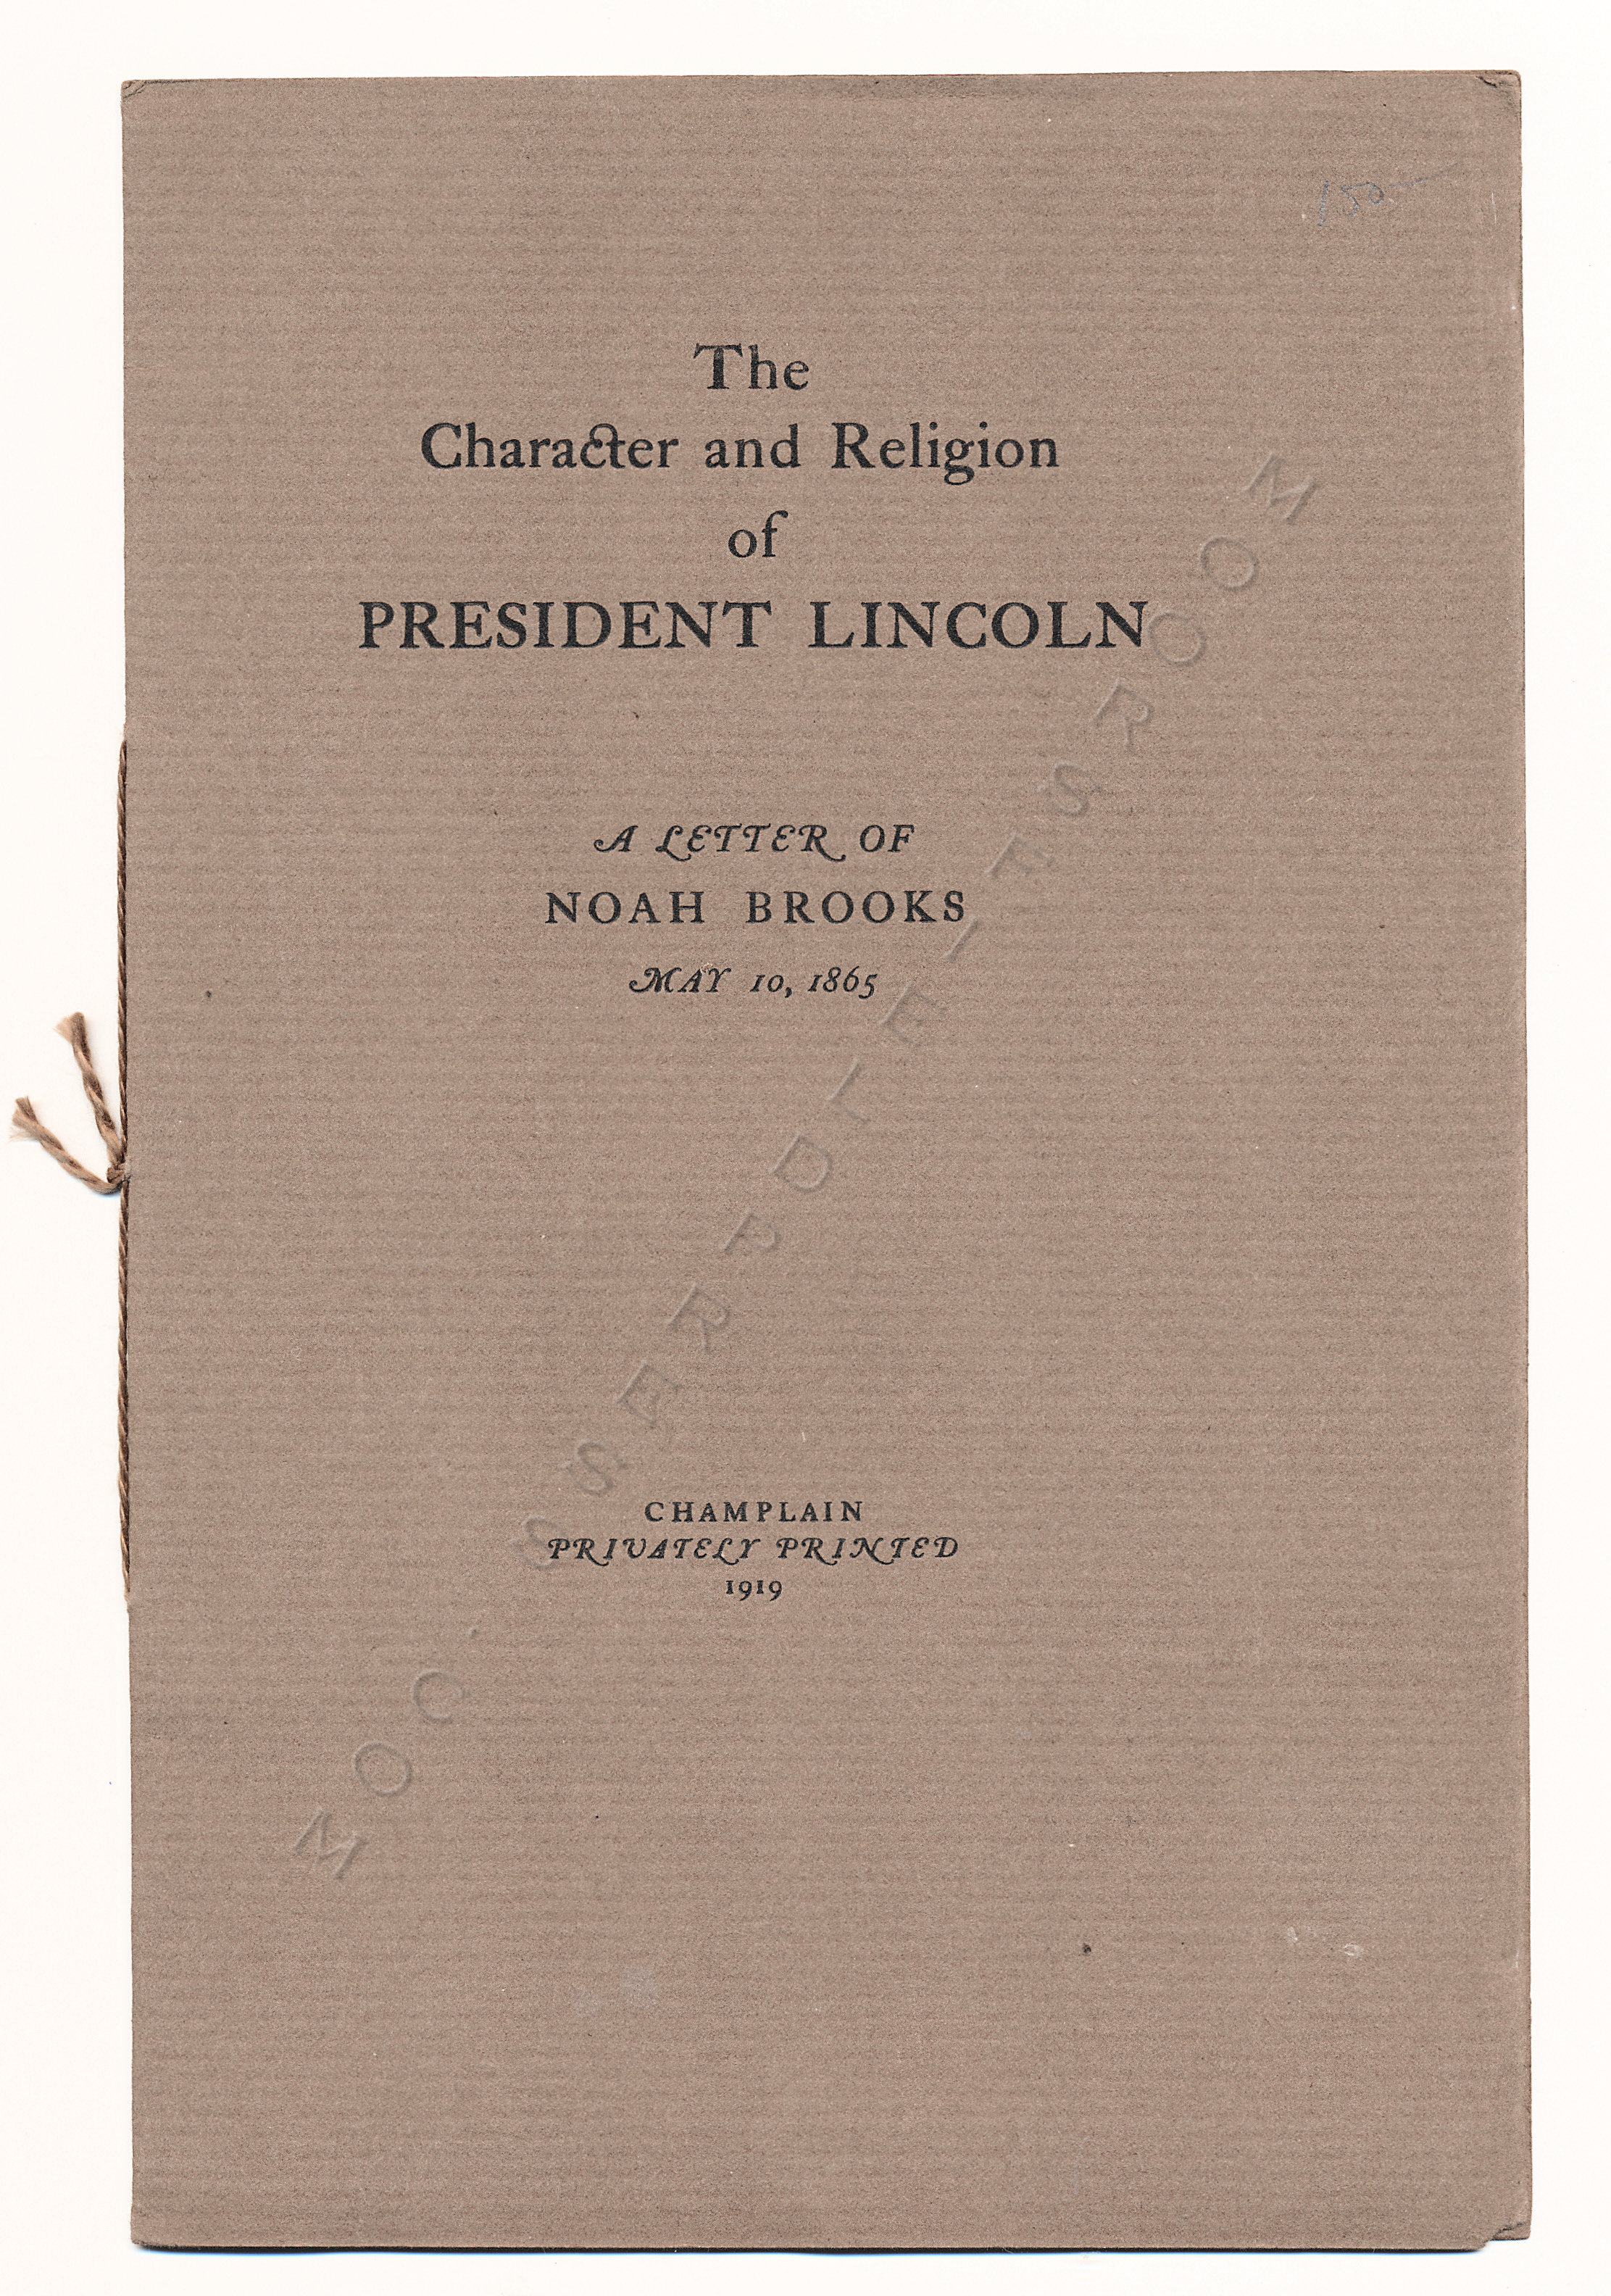 THE CHARACTER AND RELIGION OF PRESIDENT LINCOLN
                - A LETTER OF NOAH BROOKS MAY 10 1865